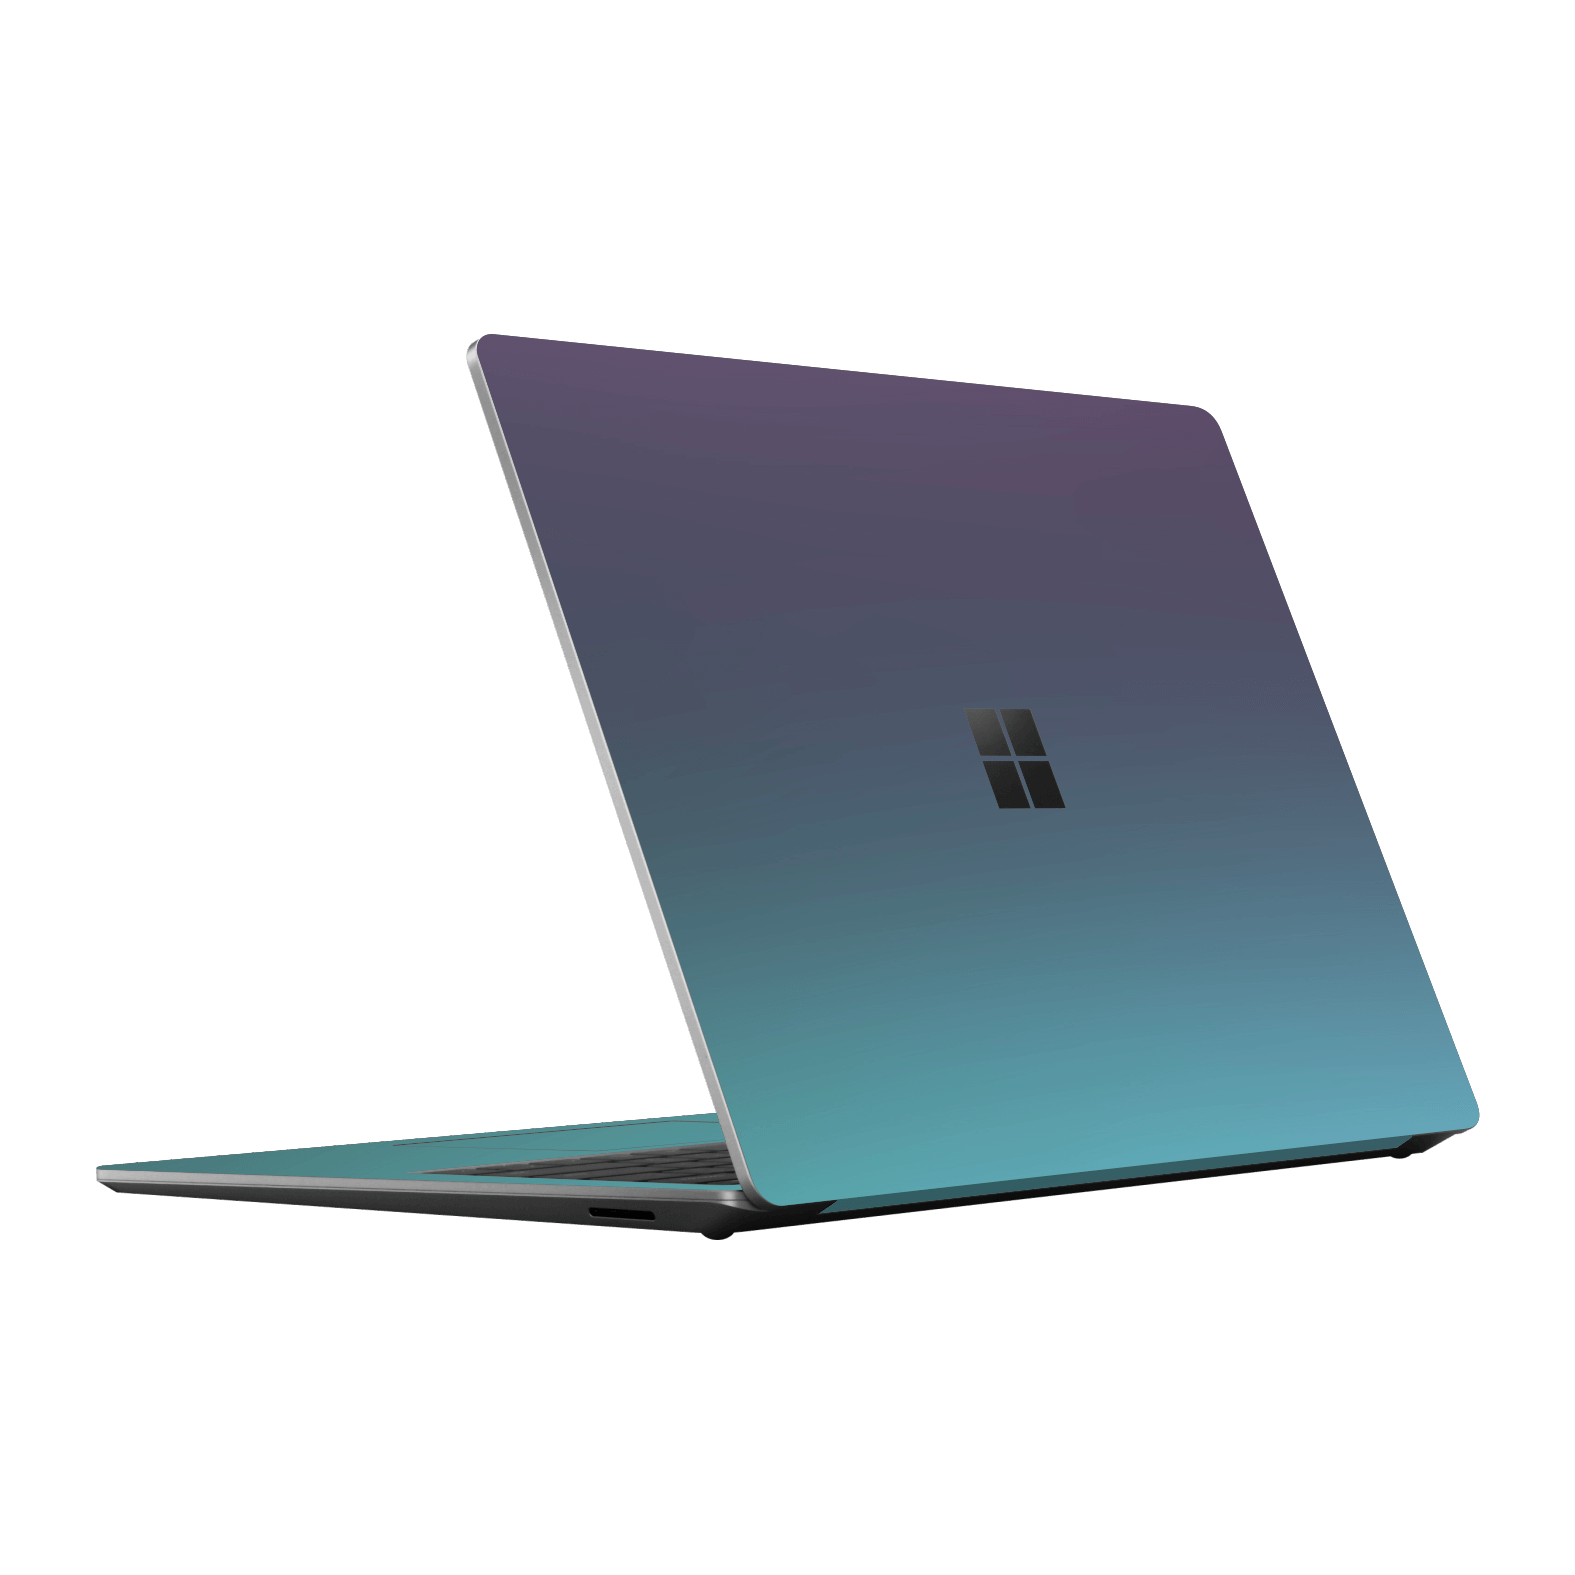 Microsoft Surface Laptop Go 3 Chameleon Turquoise-Lavender Lilac Colour-changing Metallic Skin Wrap Sticker Decal Cover Protector by EasySkinz | EasySkinz.com